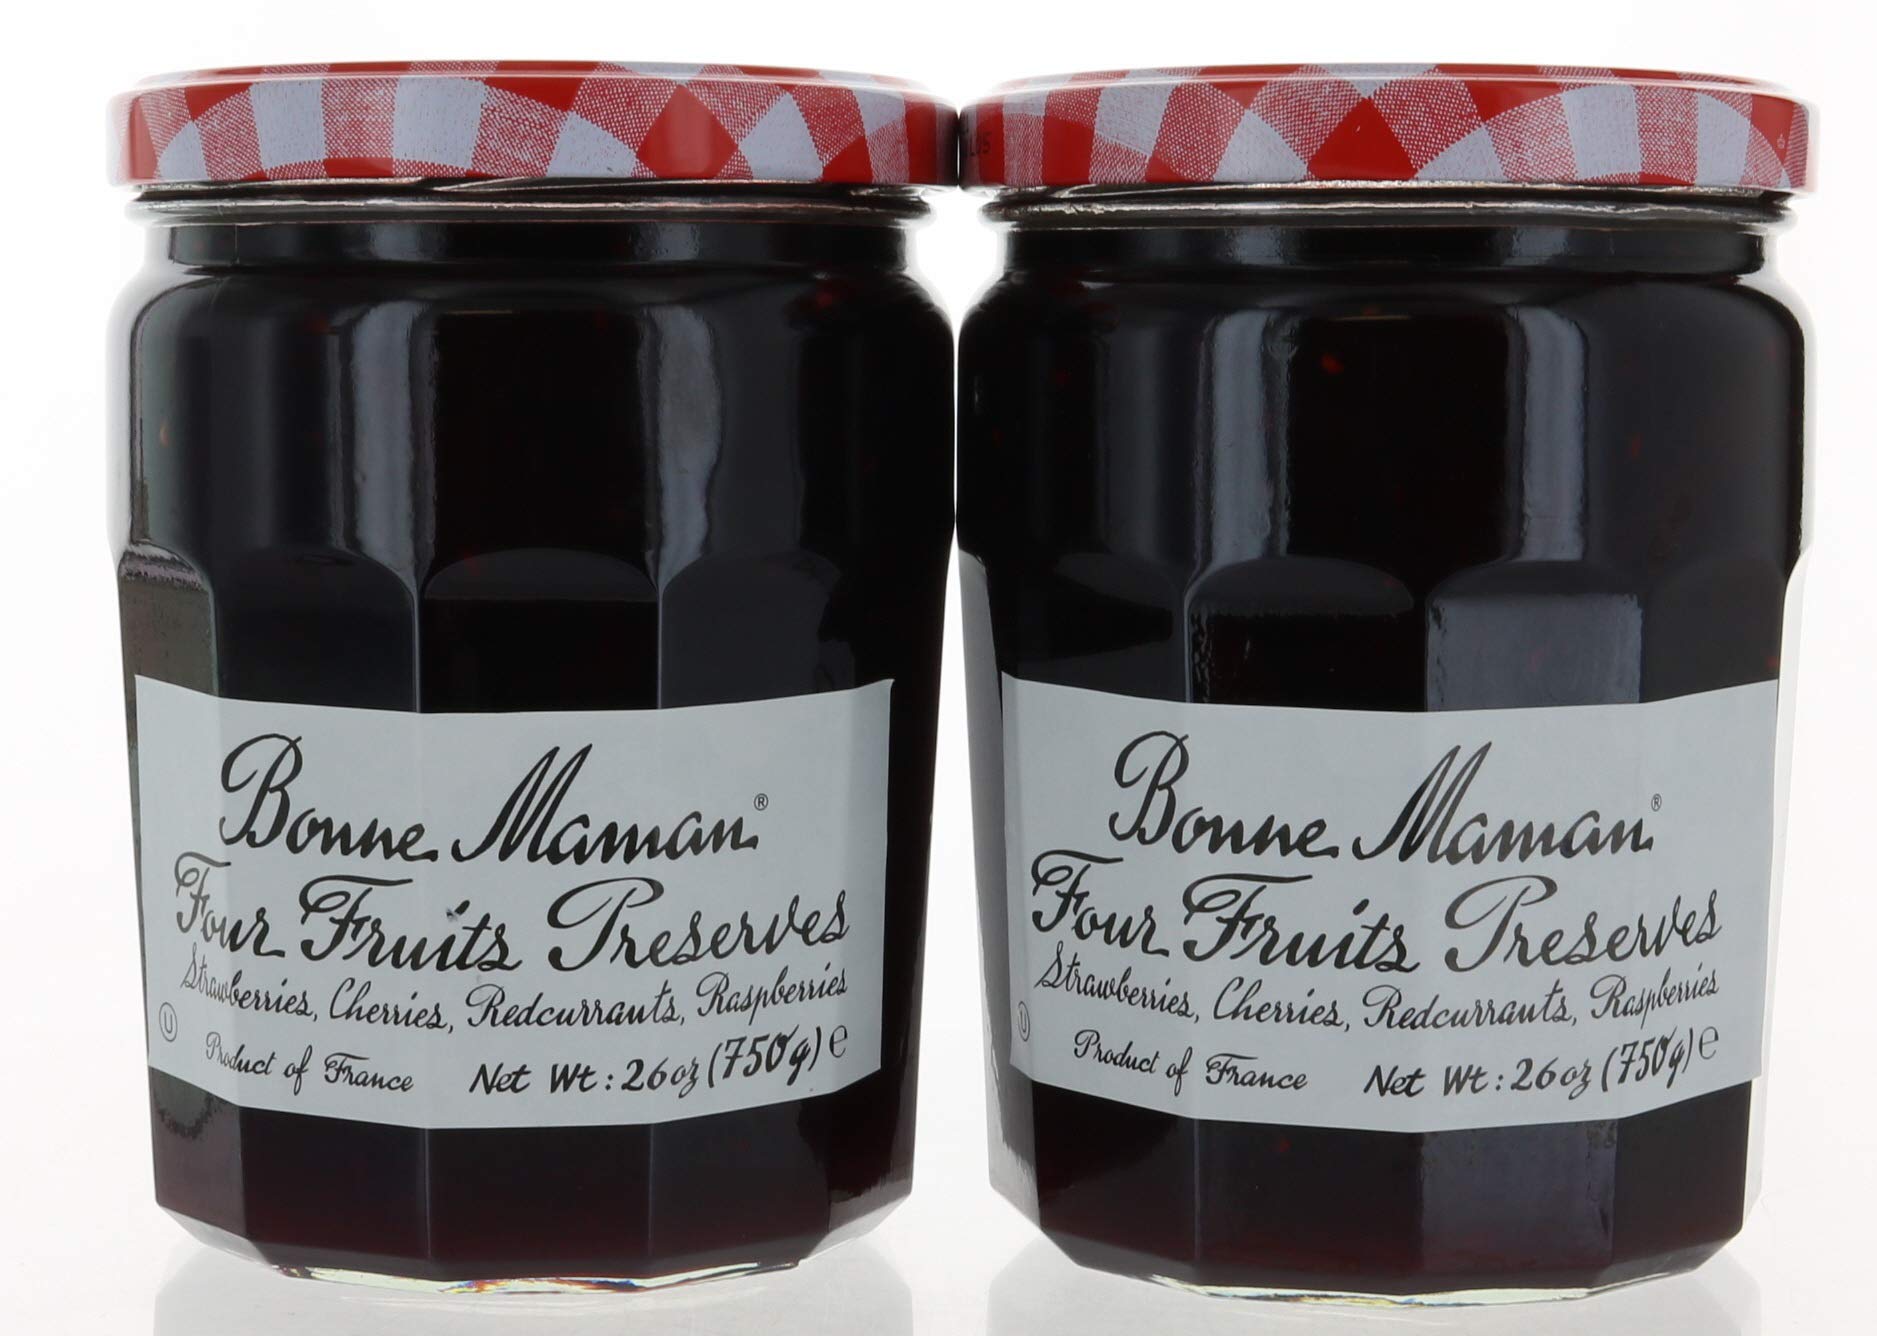 Pack of 2 Bonne Maman Four Fruits Preserves 26 oz, Strawberries, Cherries, Redcurrants & Raspberries, No Preservatives, No High Fructose Corn Syrup...